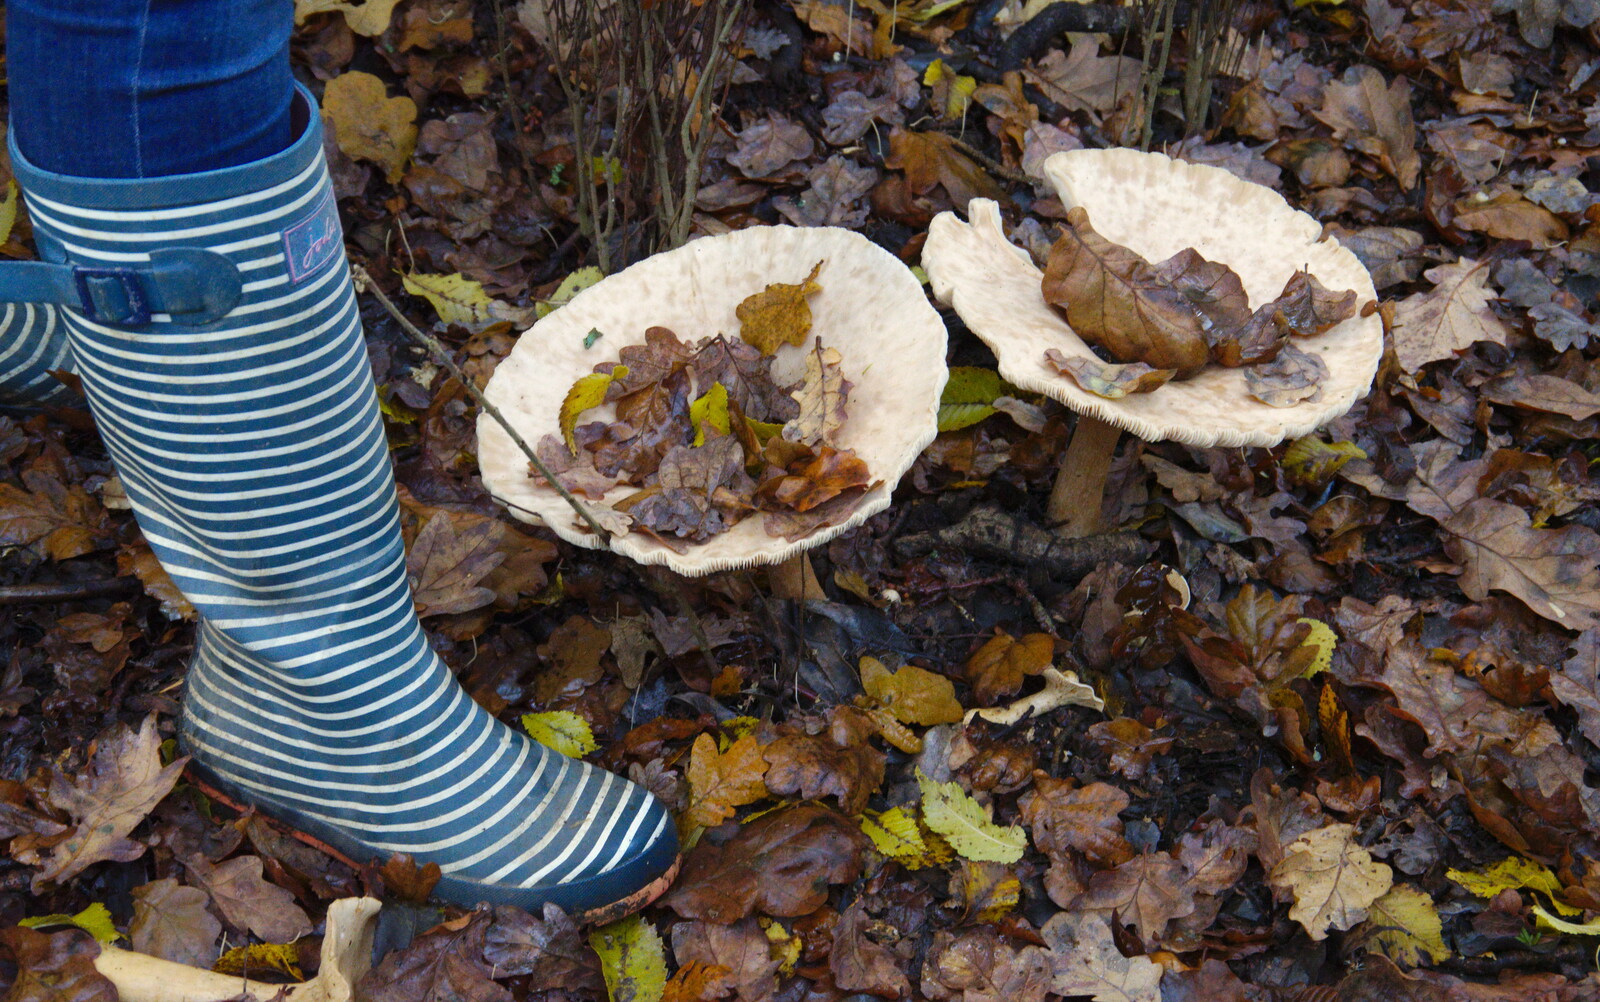 We find some huge mushrooms off the path from The Tiles of Ickworth House, Horringer, Suffolk - 30th November 2019